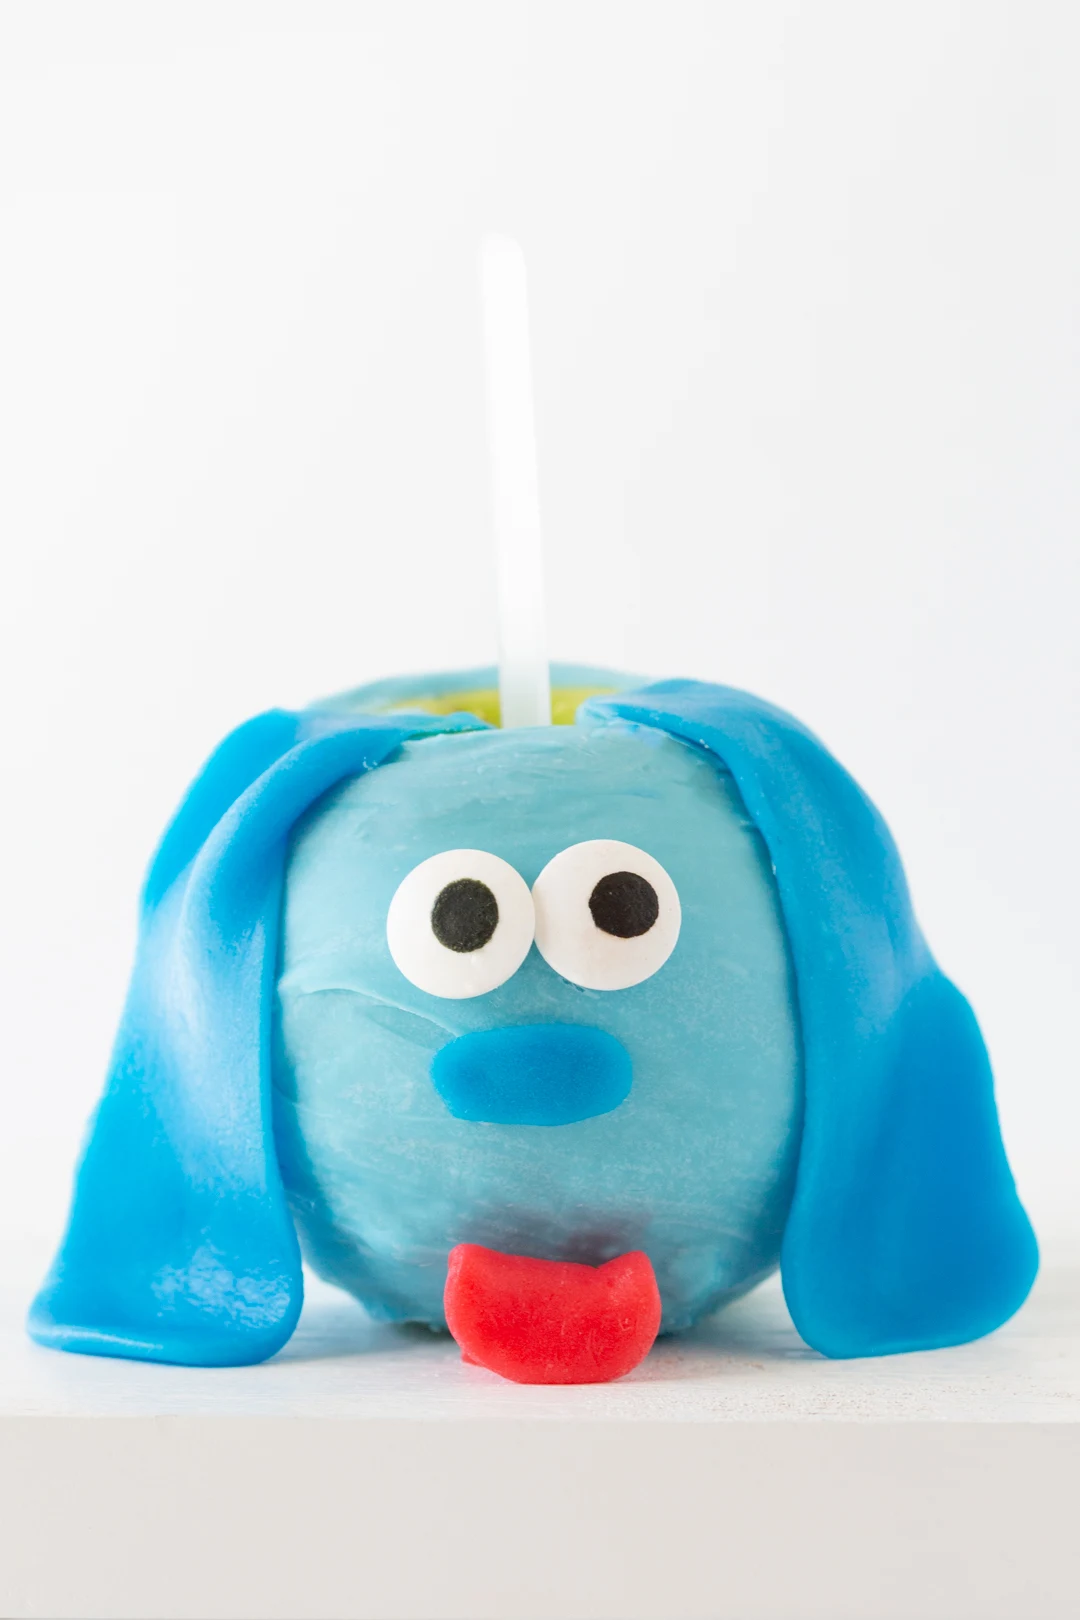 up close blues clues themed candy apple